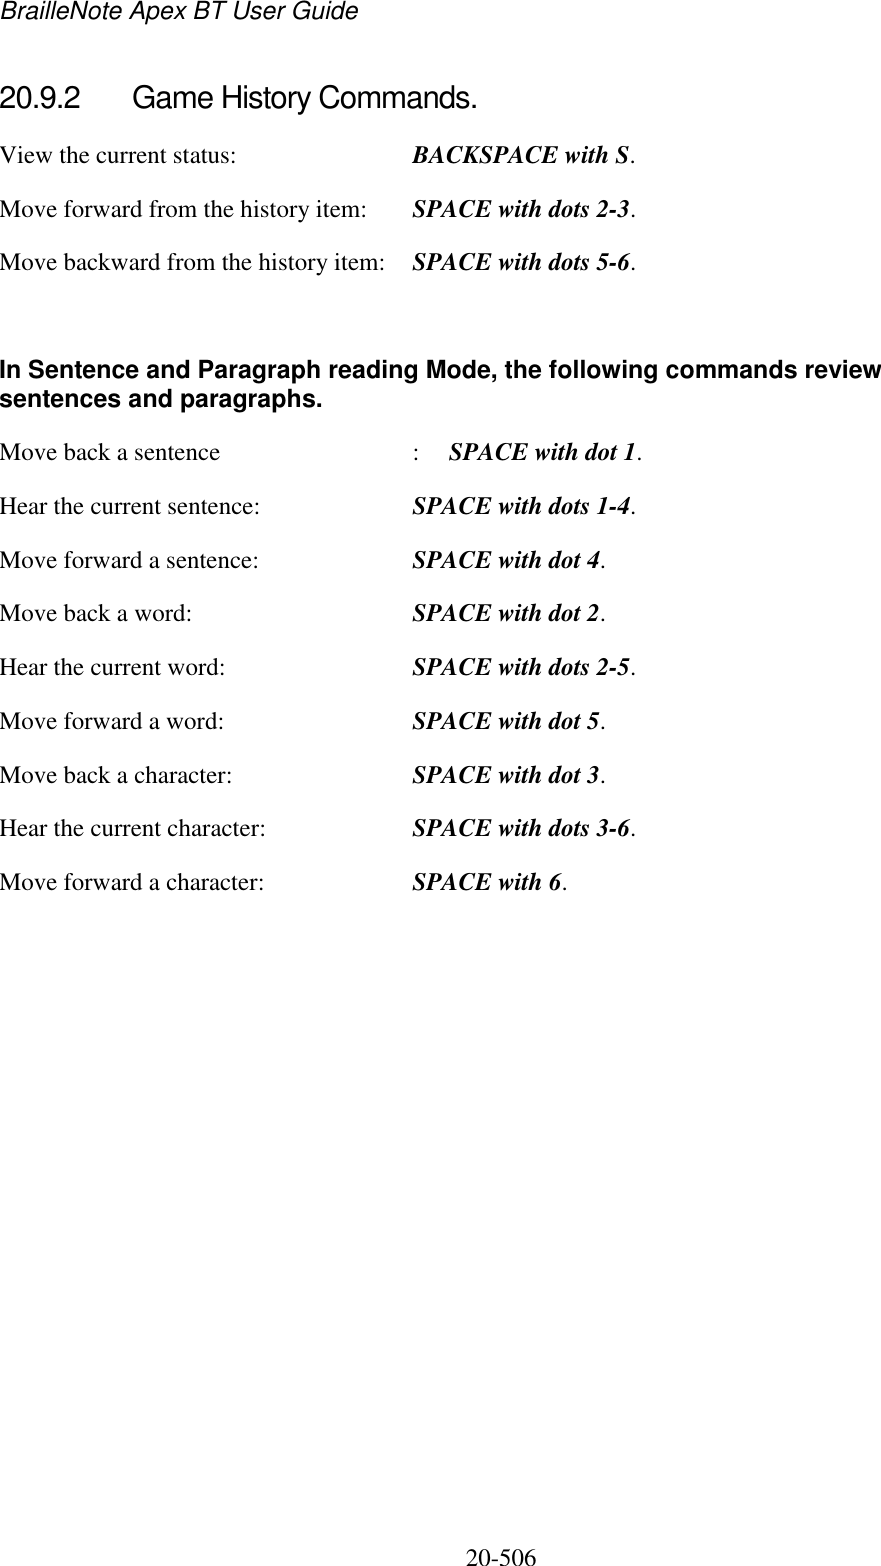 BrailleNote Apex BT User Guide   20-506   20.9.2  Game History Commands. View the current status:  BACKSPACE with S. Move forward from the history item:  SPACE with dots 2-3. Move backward from the history item:  SPACE with dots 5-6.  In Sentence and Paragraph reading Mode, the following commands review sentences and paragraphs. Move back a sentence  :  SPACE with dot 1. Hear the current sentence:  SPACE with dots 1-4. Move forward a sentence:  SPACE with dot 4. Move back a word:  SPACE with dot 2. Hear the current word:  SPACE with dots 2-5. Move forward a word:  SPACE with dot 5. Move back a character:  SPACE with dot 3. Hear the current character:  SPACE with dots 3-6. Move forward a character:  SPACE with 6.  